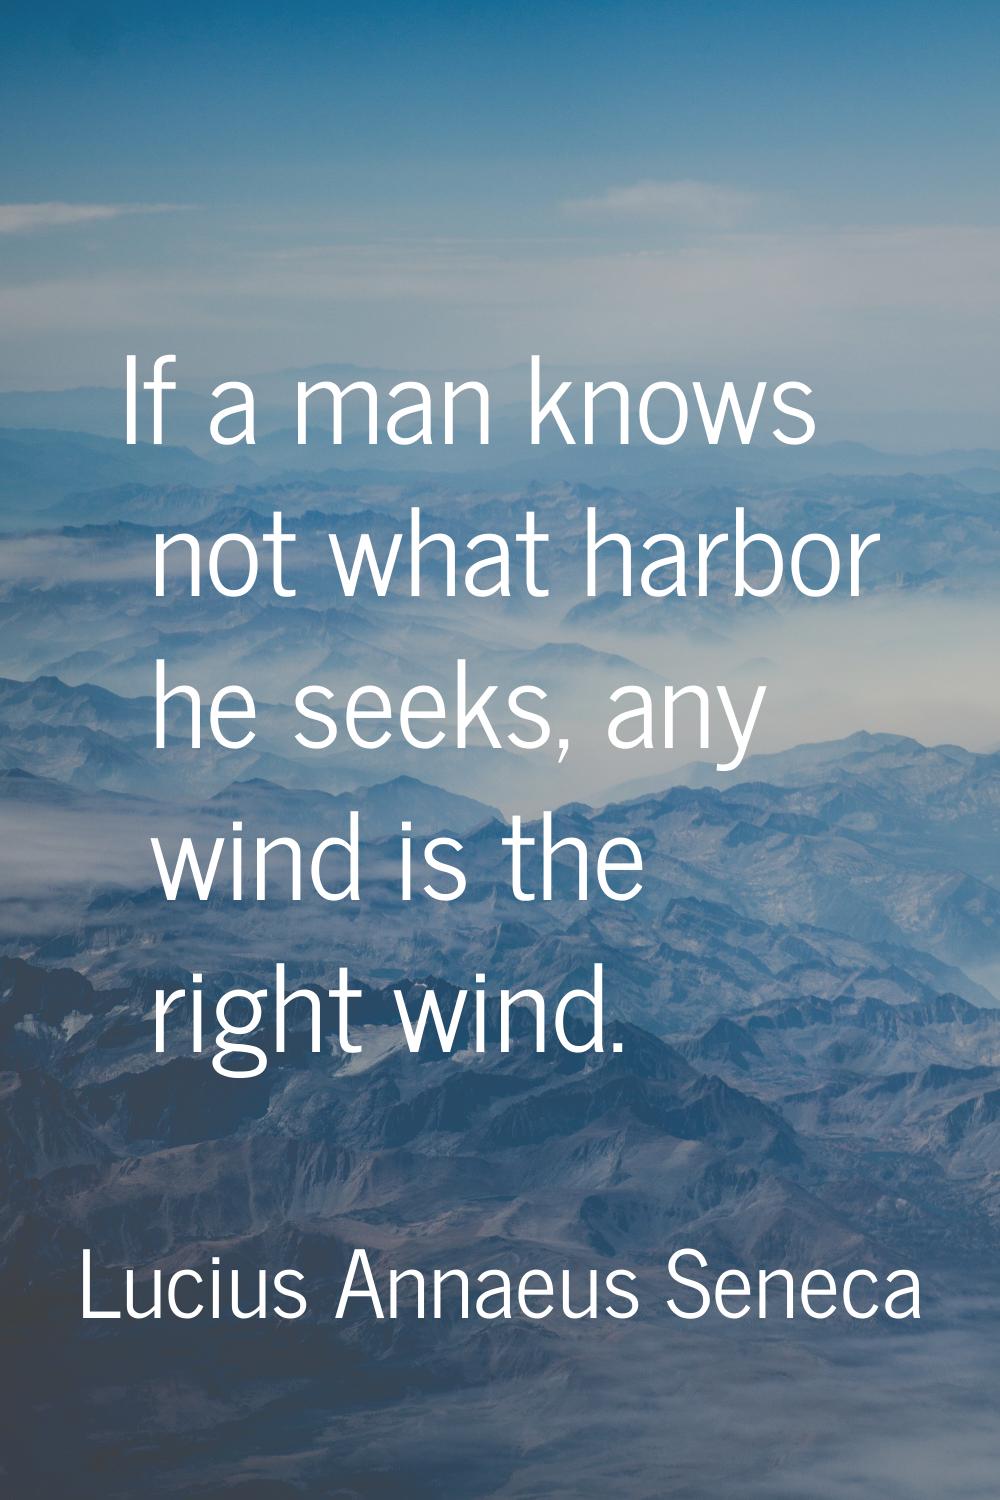 If a man knows not what harbor he seeks, any wind is the right wind.